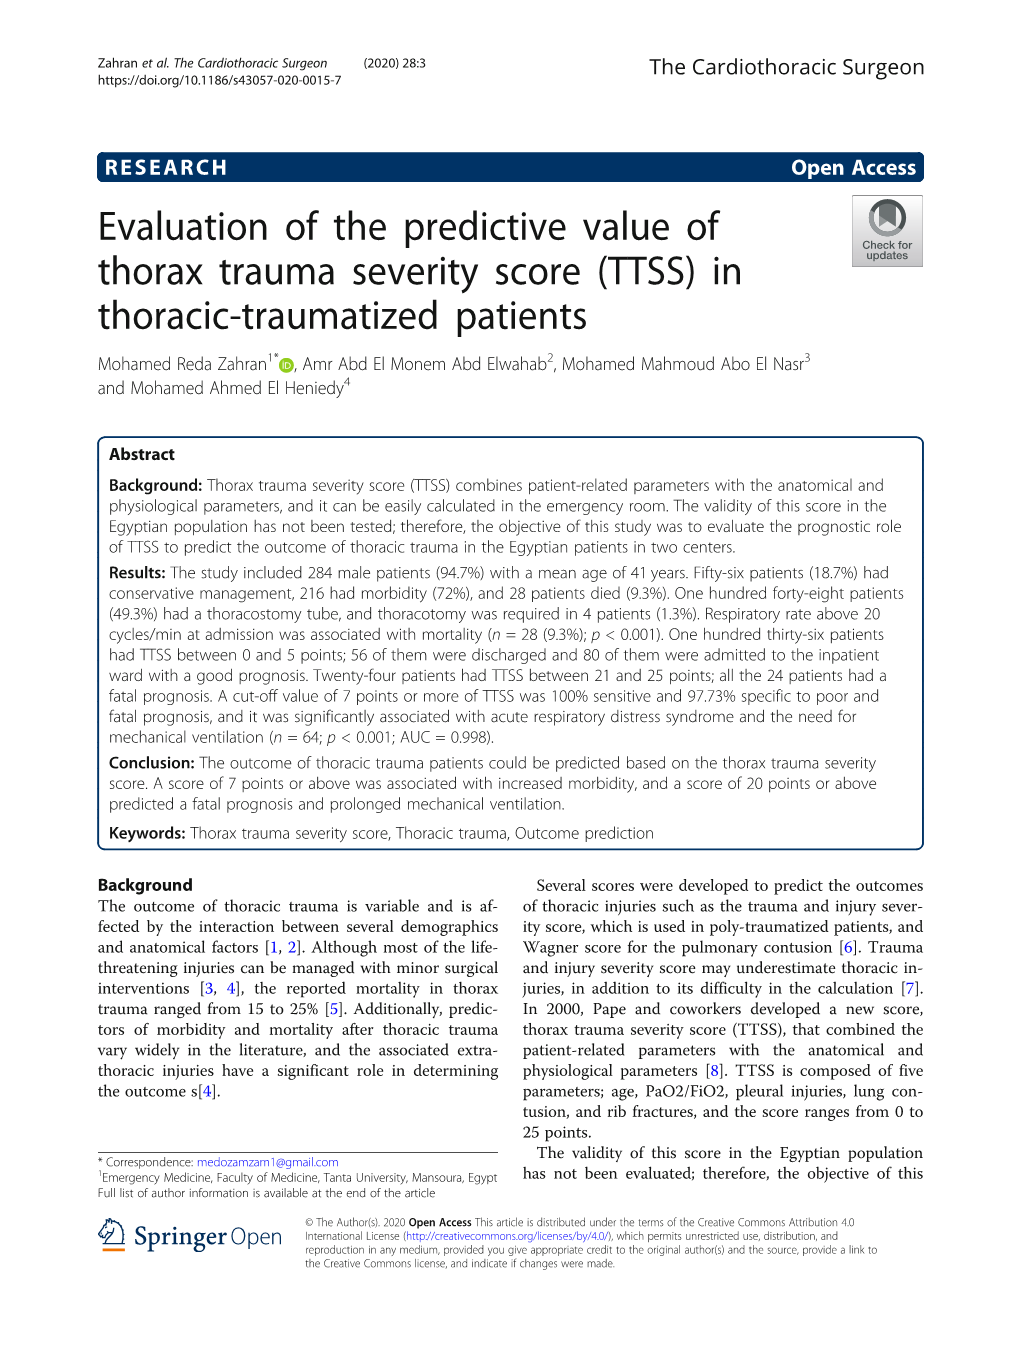 Evaluation of the Predictive Value of Thorax Trauma Severity Score (TTSS) in Thoracic-Traumatized Patients